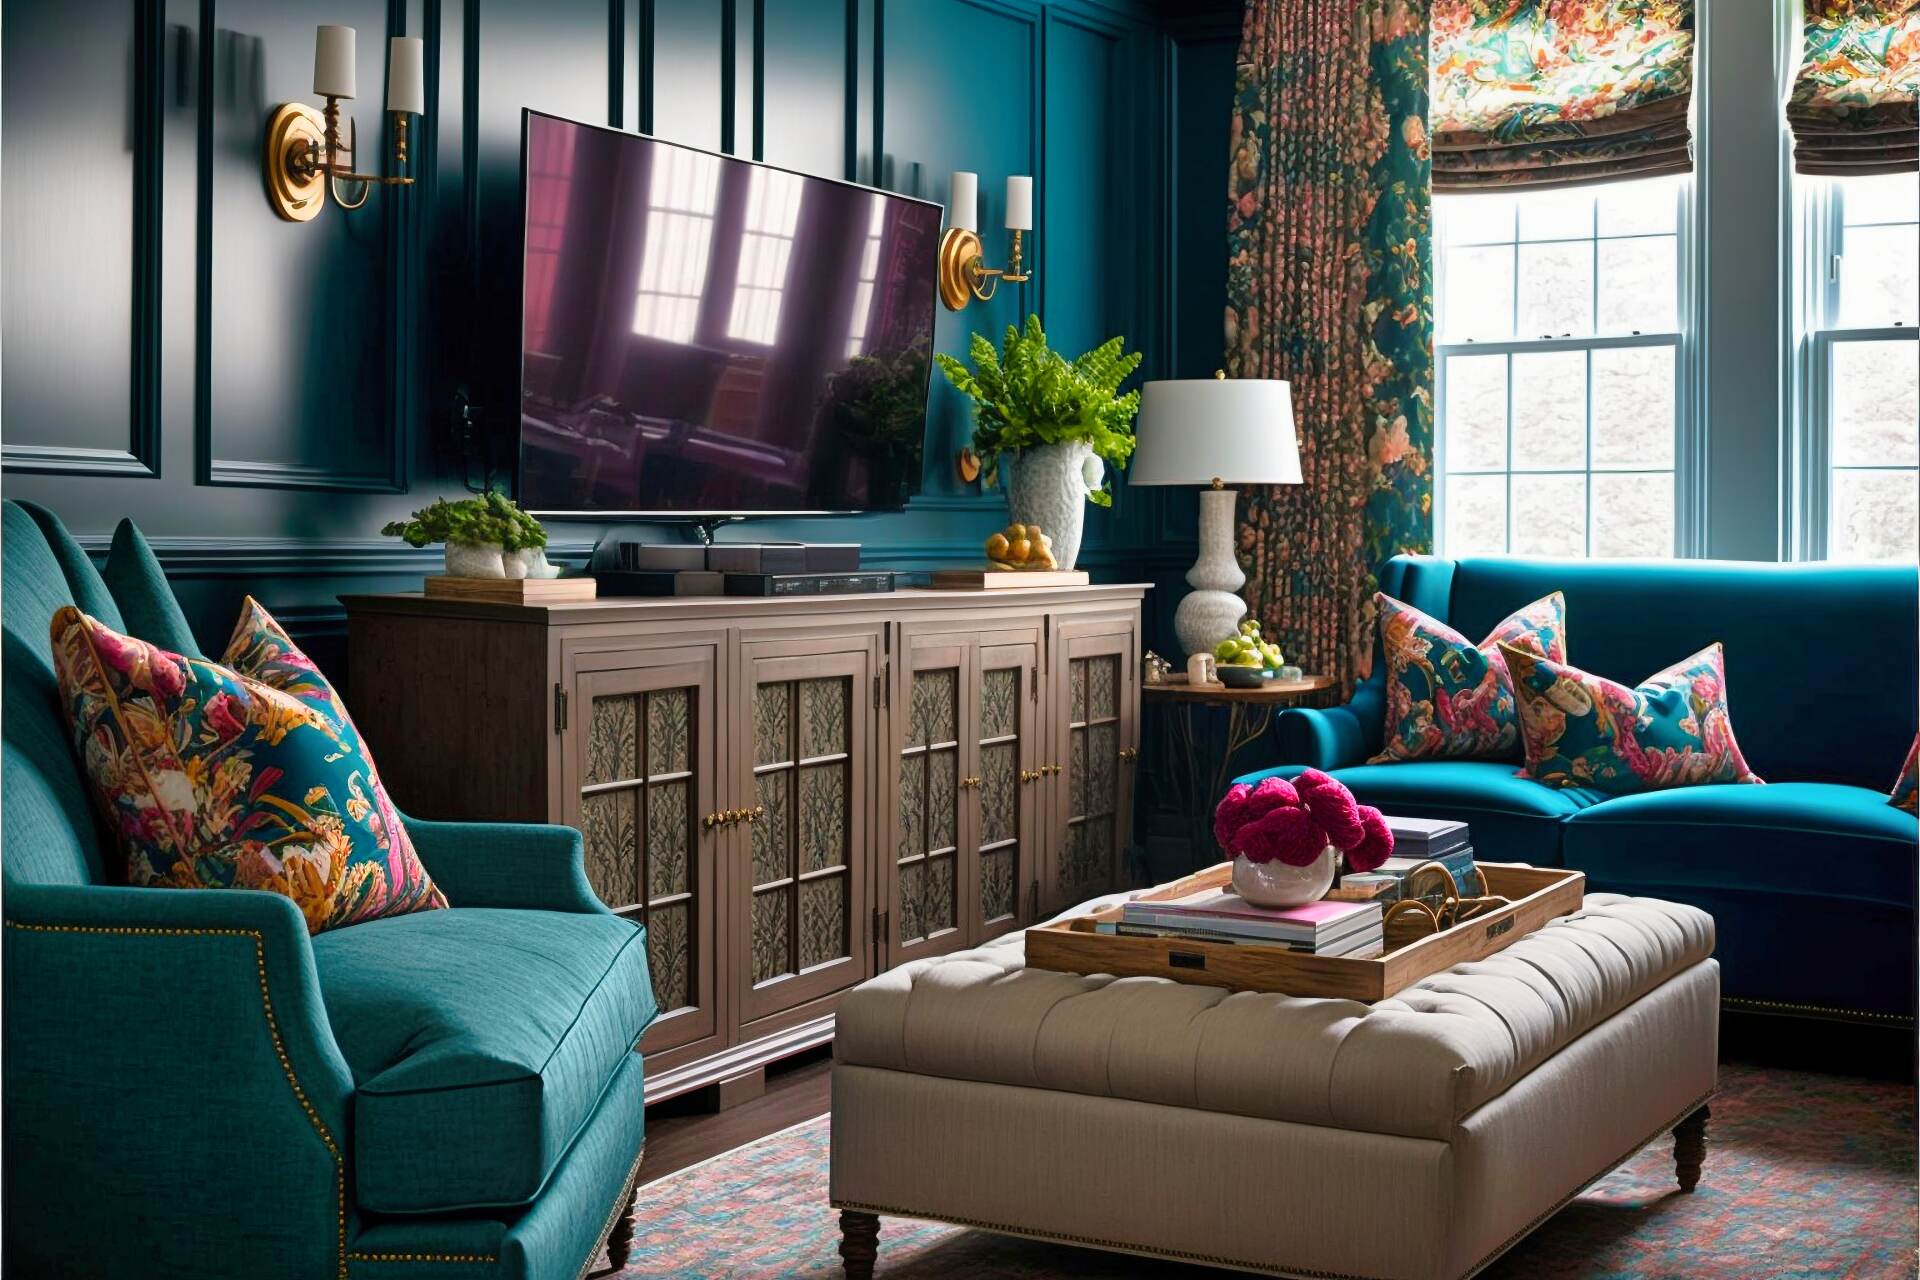 Timeless Traditional Living Room - This Traditional-Style Living Room Packs In A Peppering Of Maximalist Elements To Keep It From Feeling Stuffy. An Elegant Dark-Wood Entertainment Console Frames A Flat-Screen Tv And Sits Against A Deep Teal Wall. A Four-Seat Sofa Is Topped With Plush Patterned Pillows And A Rainbow Of Accent Chairs, Side Tables, And Area Rugs Add Vibrant Touches Of Color. Fresh Plants And Simple Artwork Bring Life To The Warm, Inviting Atmosphere.